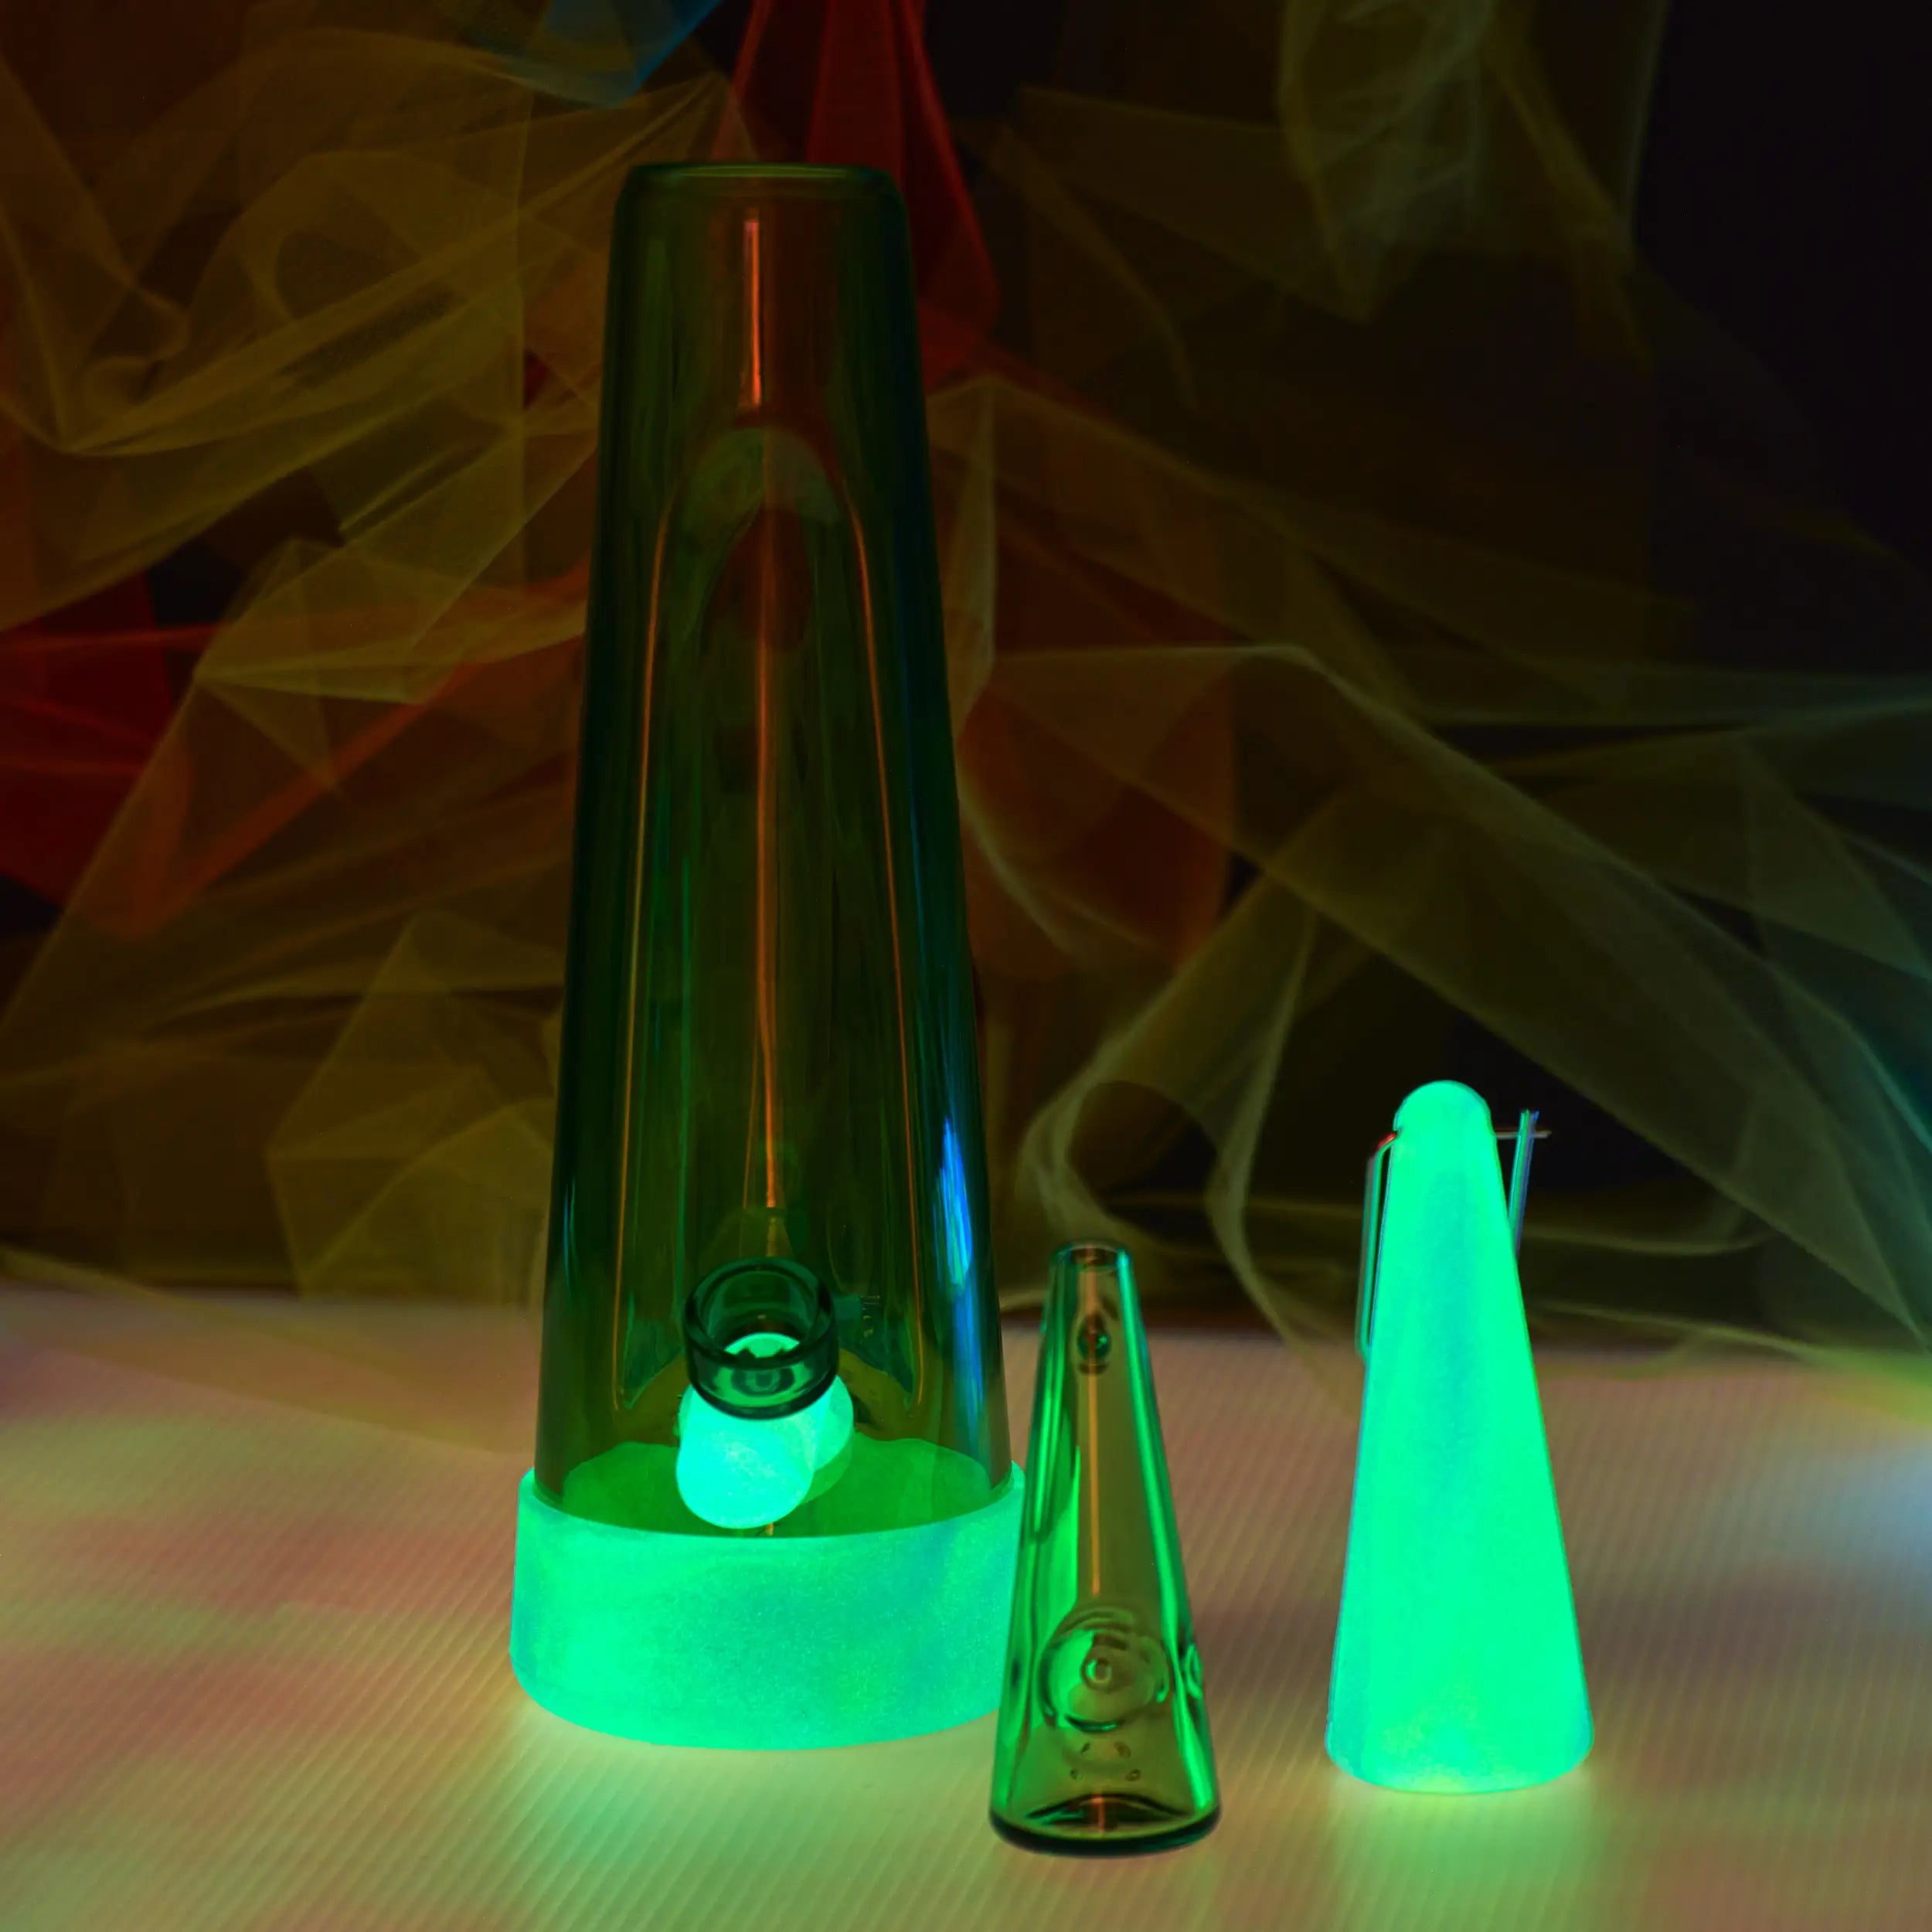 Elevate Your Smoking Experience with Session Goods GLOW Green Bong and Pipe Set: Shine Bright!